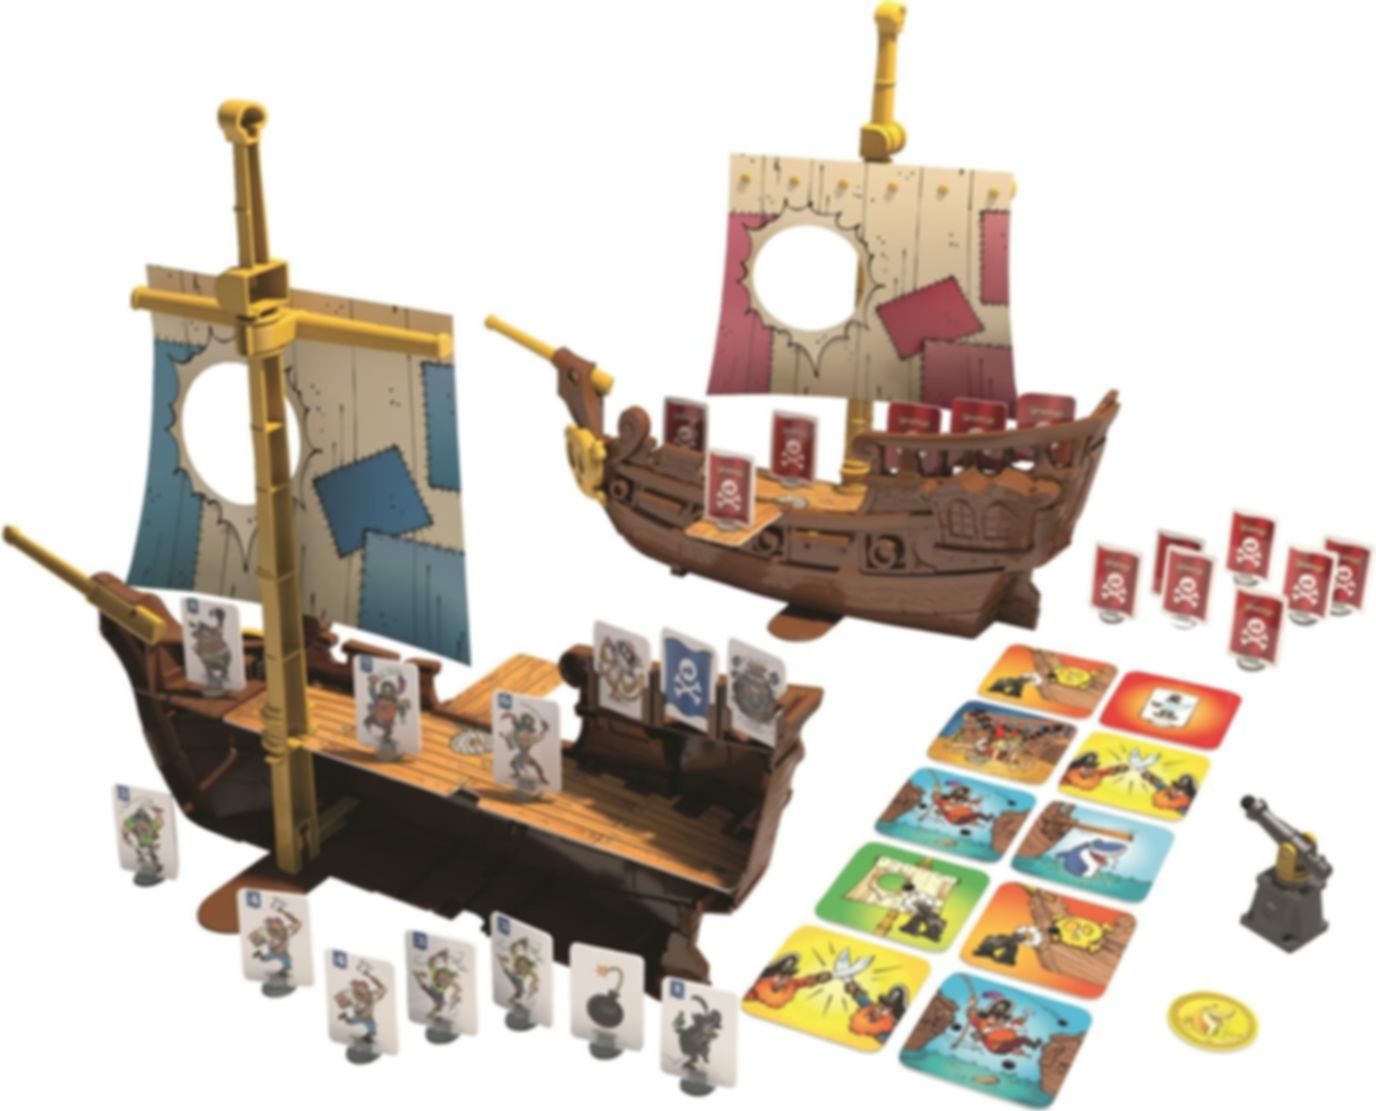 Stratego Pirates! components